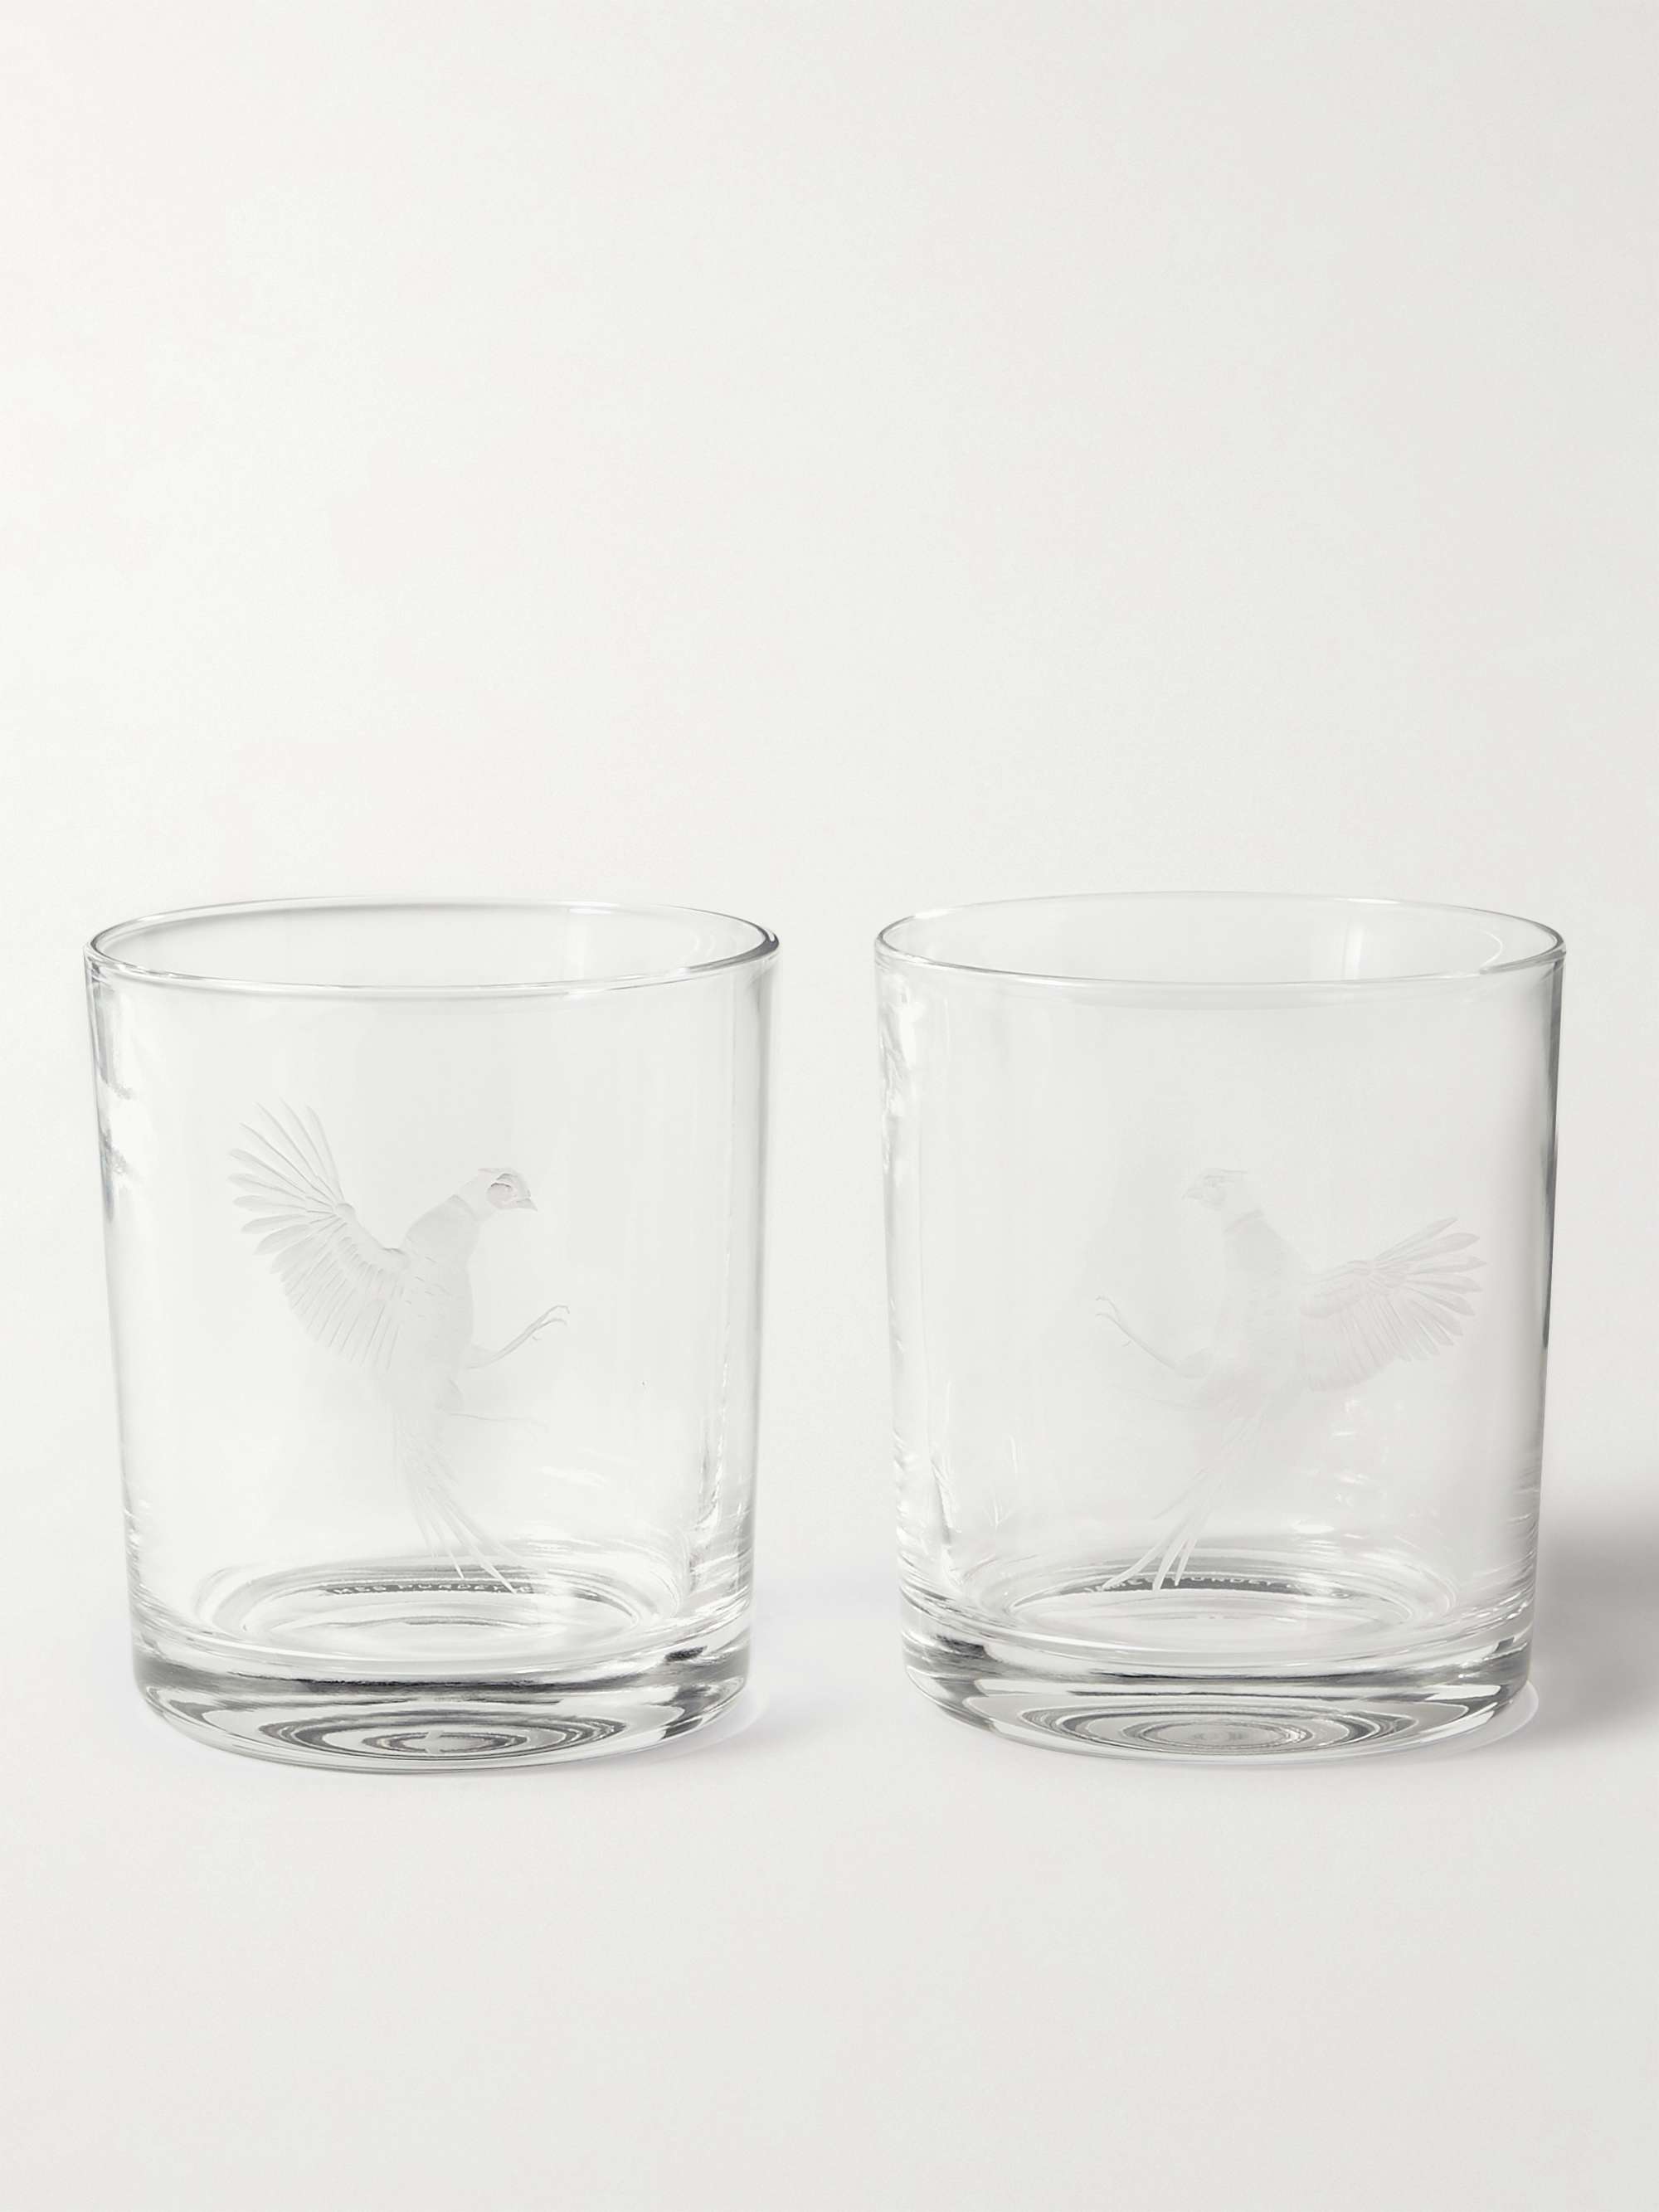 PURDEY Set of Two Engraved Crystal Tumblers